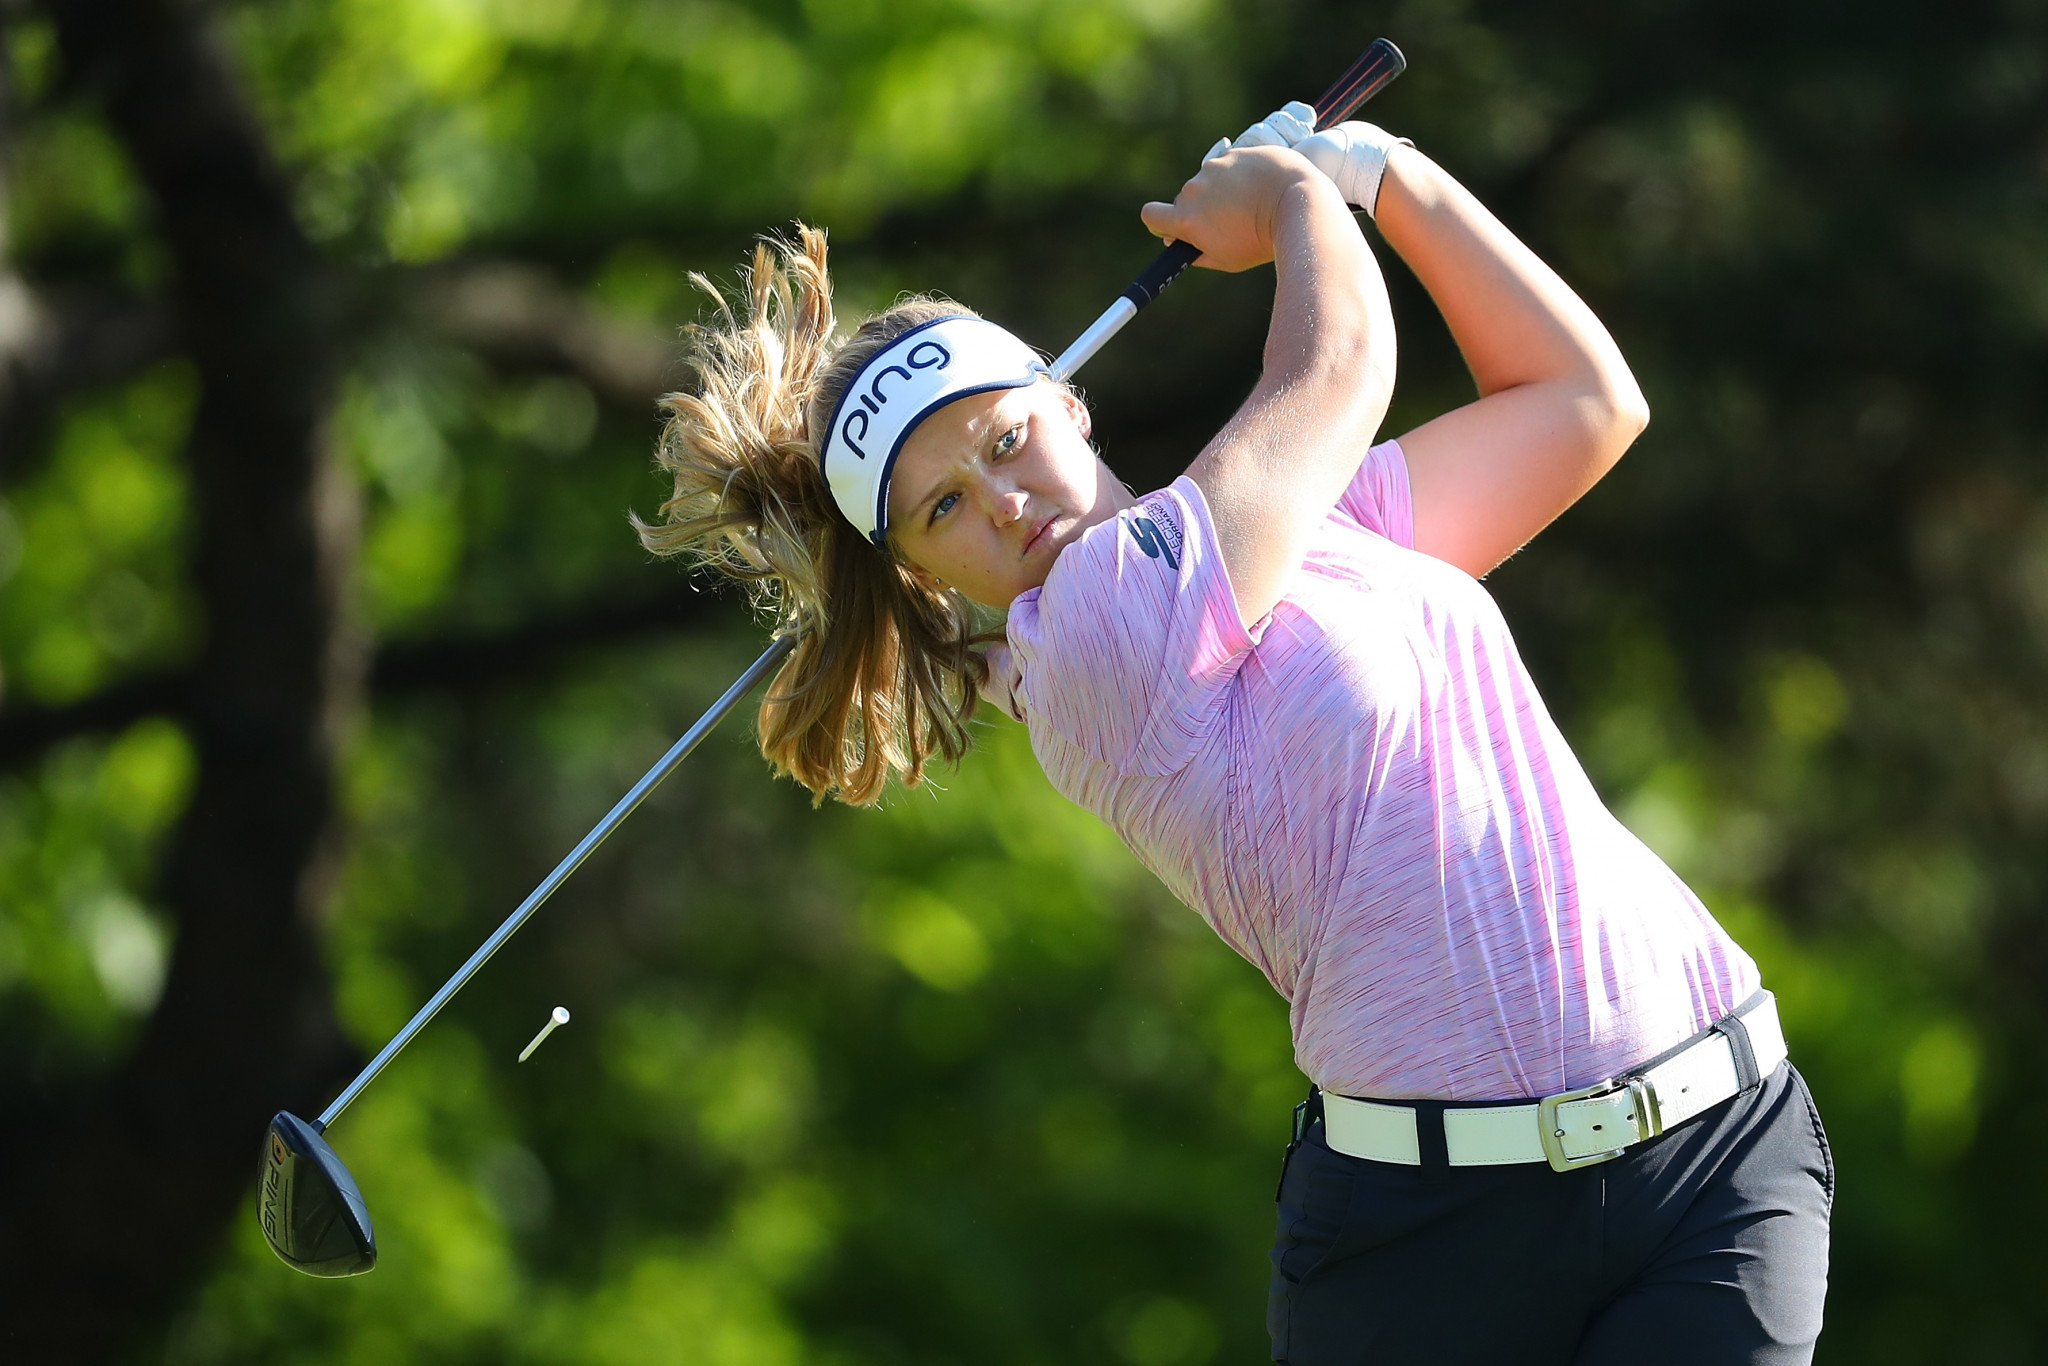 Canada's Brooke Henderson is among the frontrunners ©Getty Images